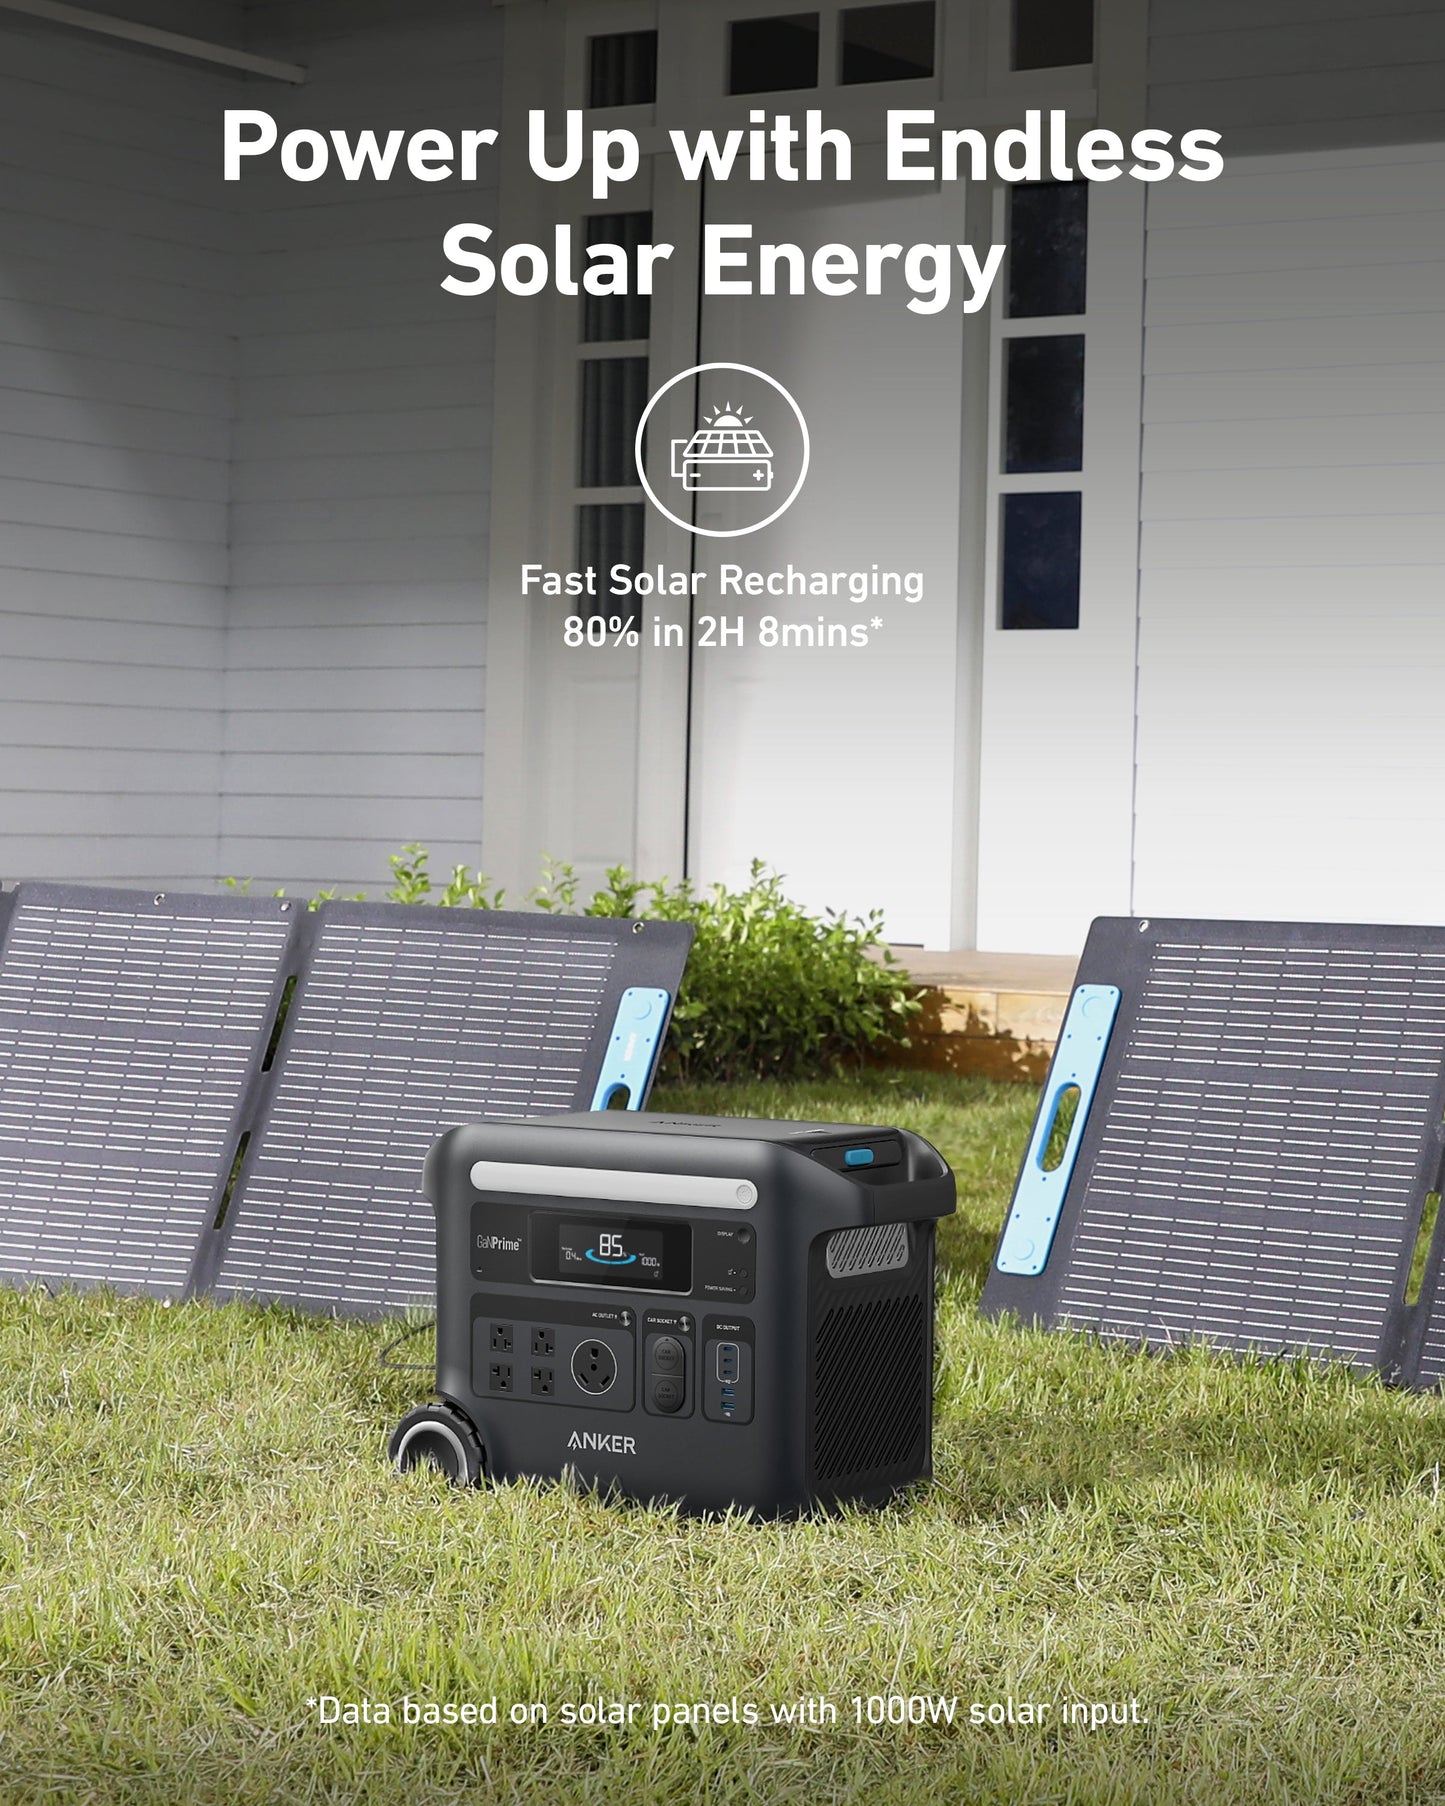 Solar & Battery Powered - Anker SOLIX F2600 Solar Generator - 2560Wh | 2400W |  With 5* Anker 531 200W Solar Panel